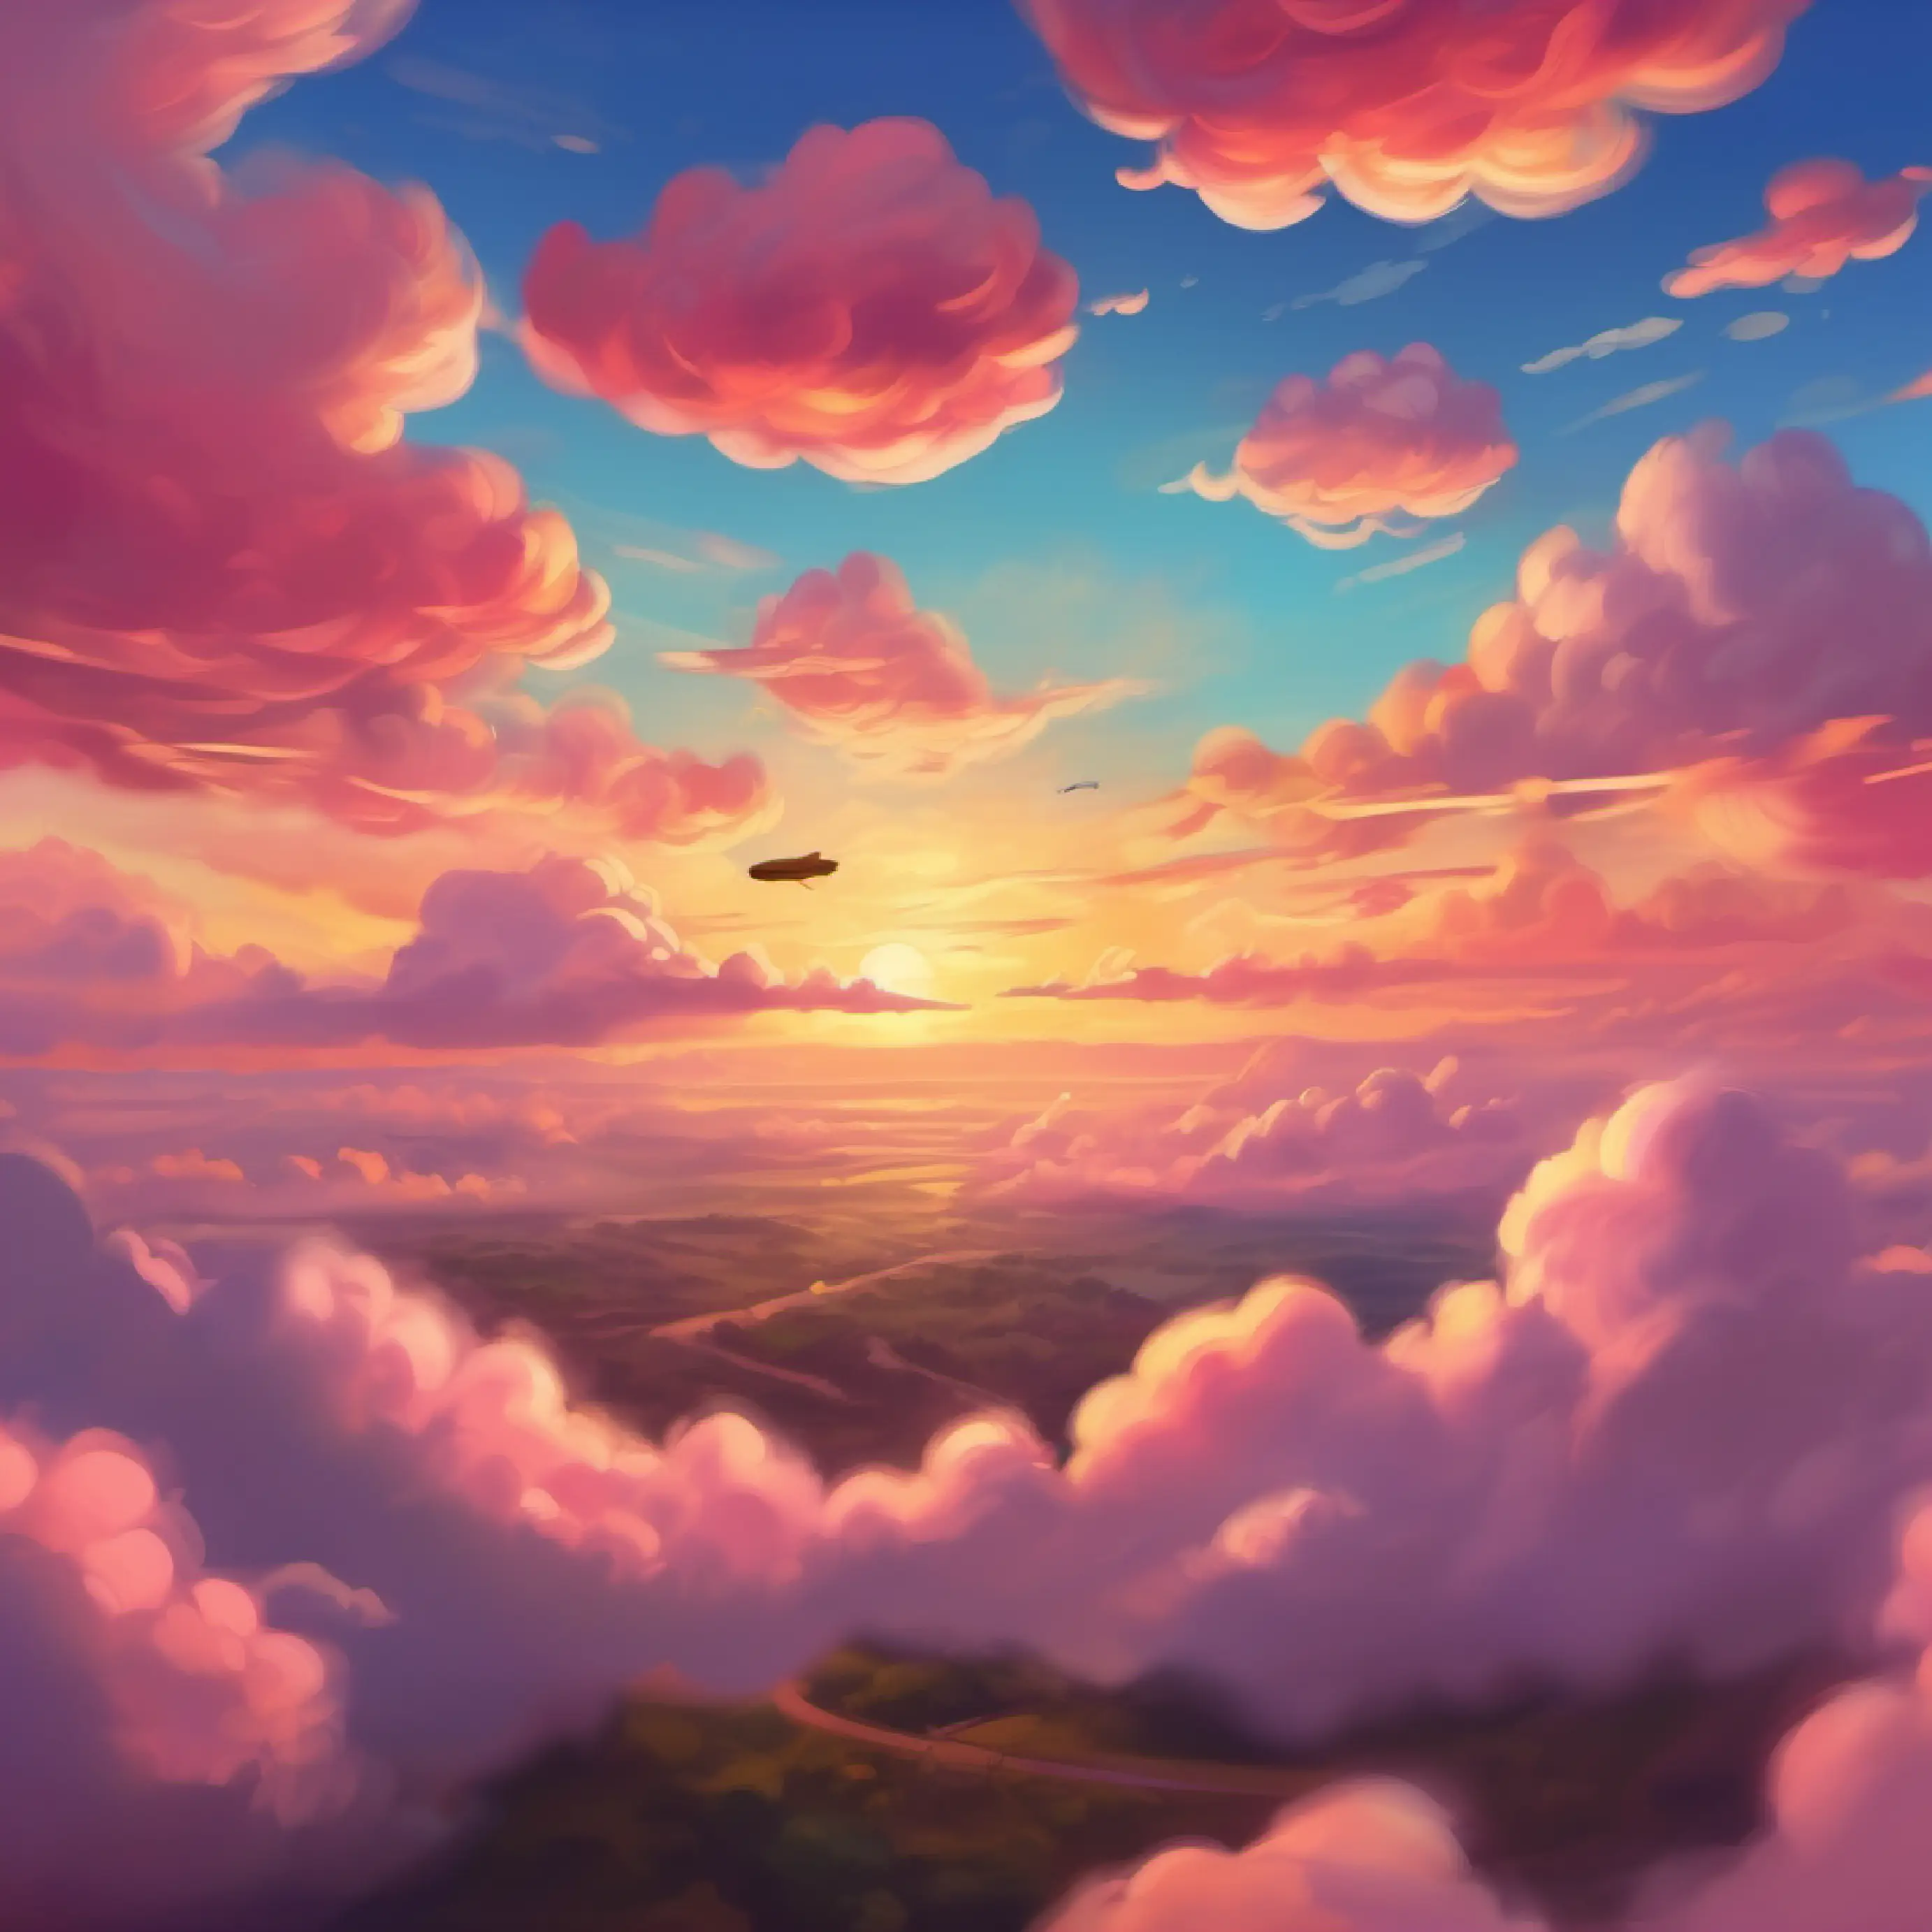 Rosa flies higher; clouds glow with the sunset.